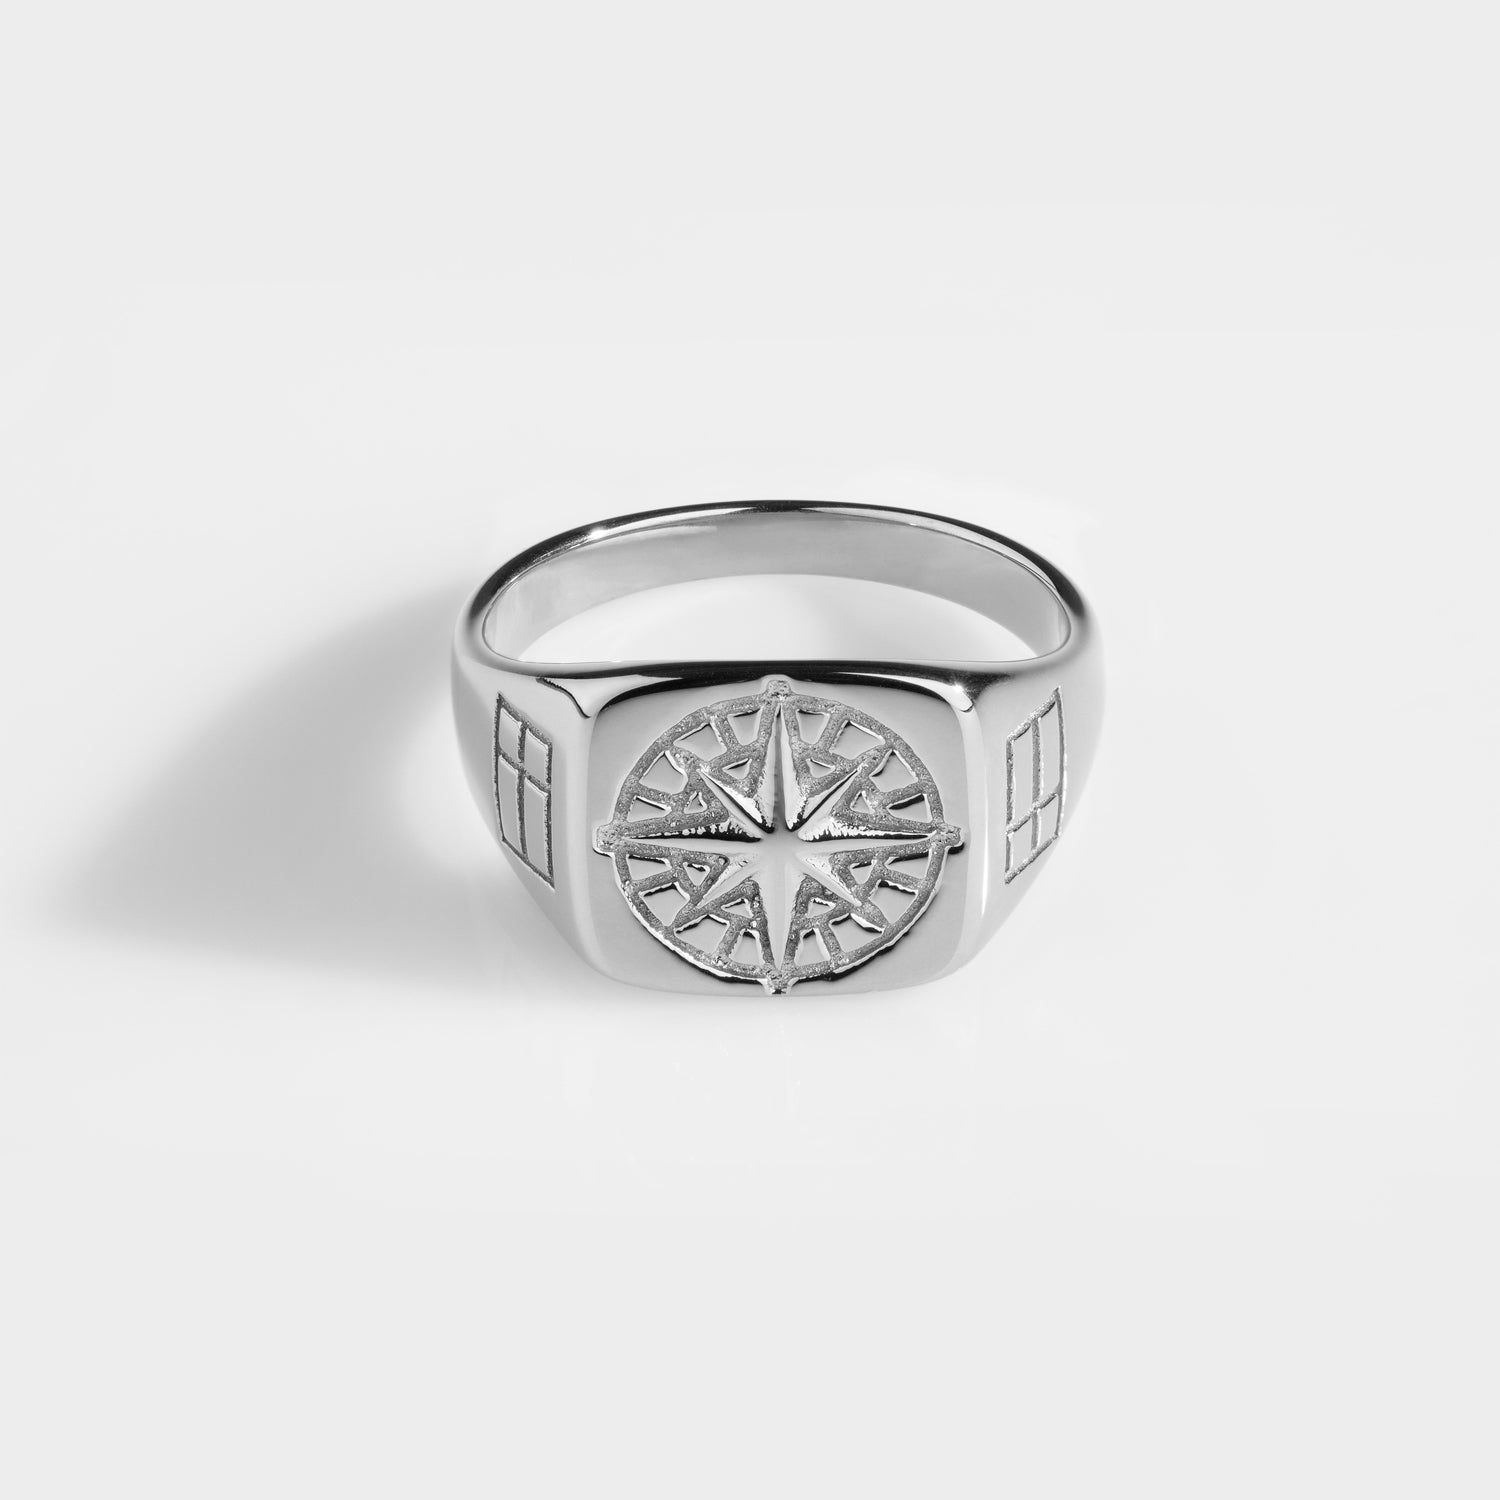 Compass Signature - Silver-toned ring